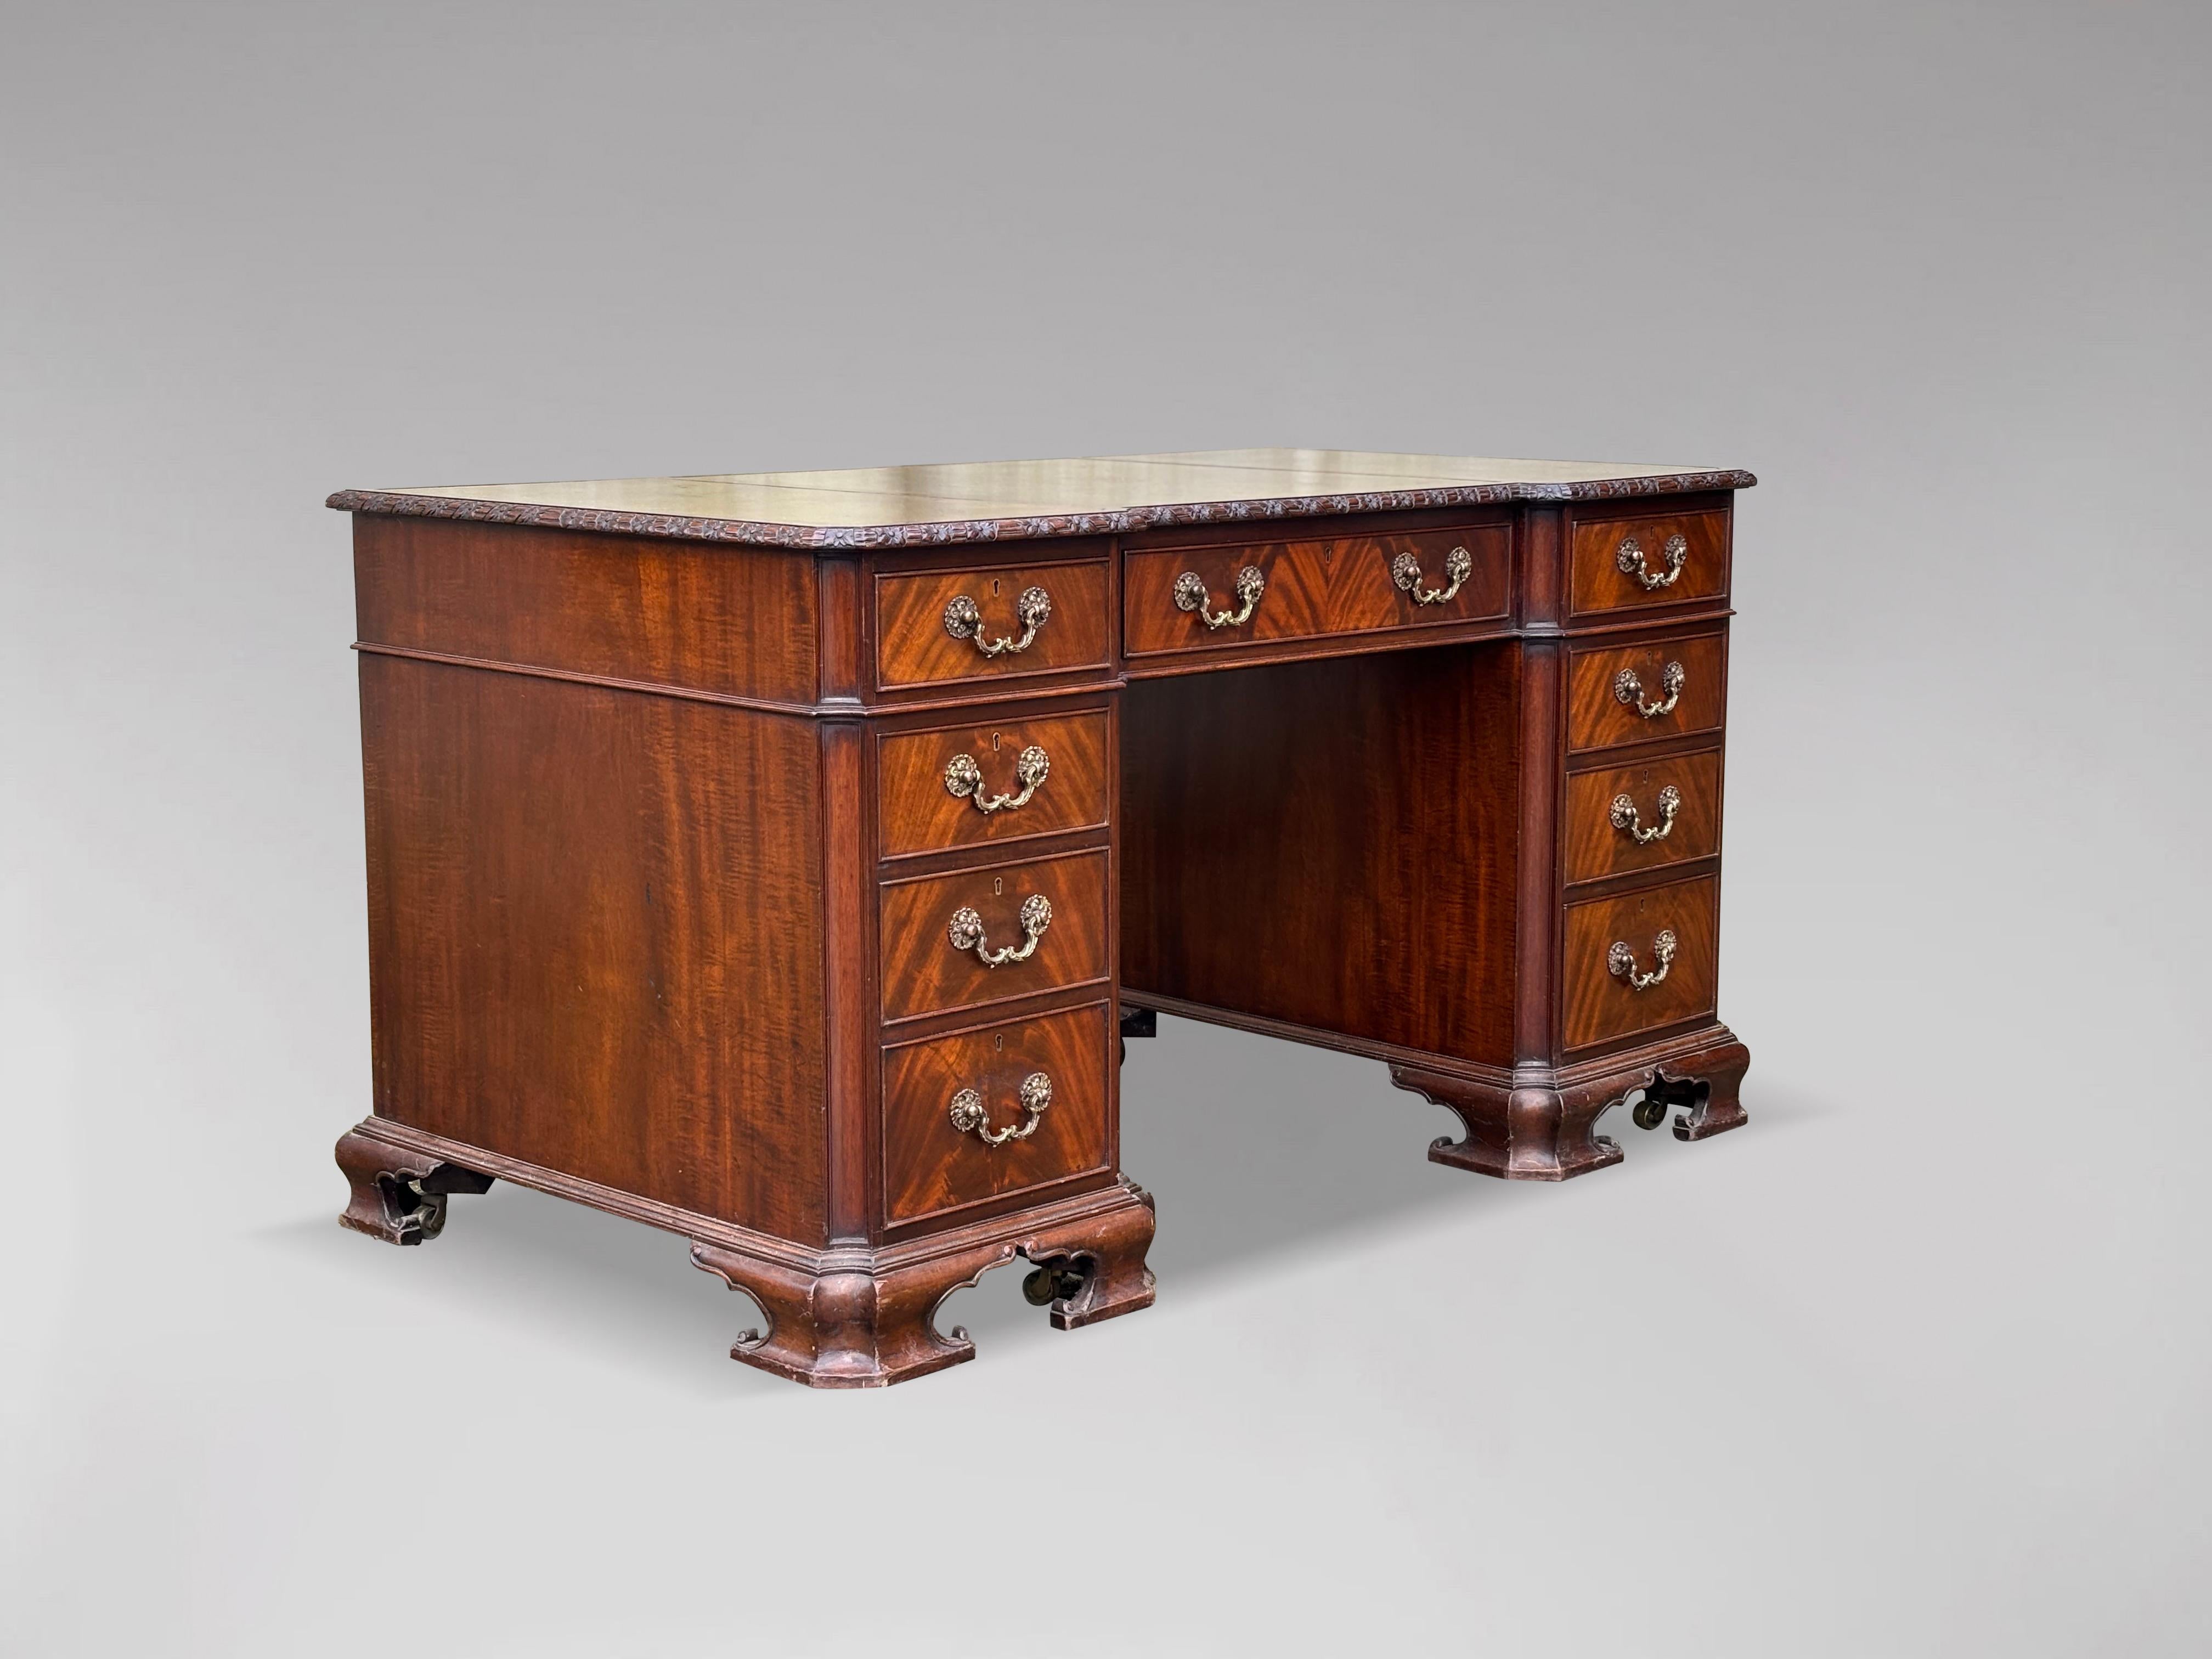 19th Century Chippendale Style Mahogany Pedestal Desk In Good Condition For Sale In Petworth,West Sussex, GB